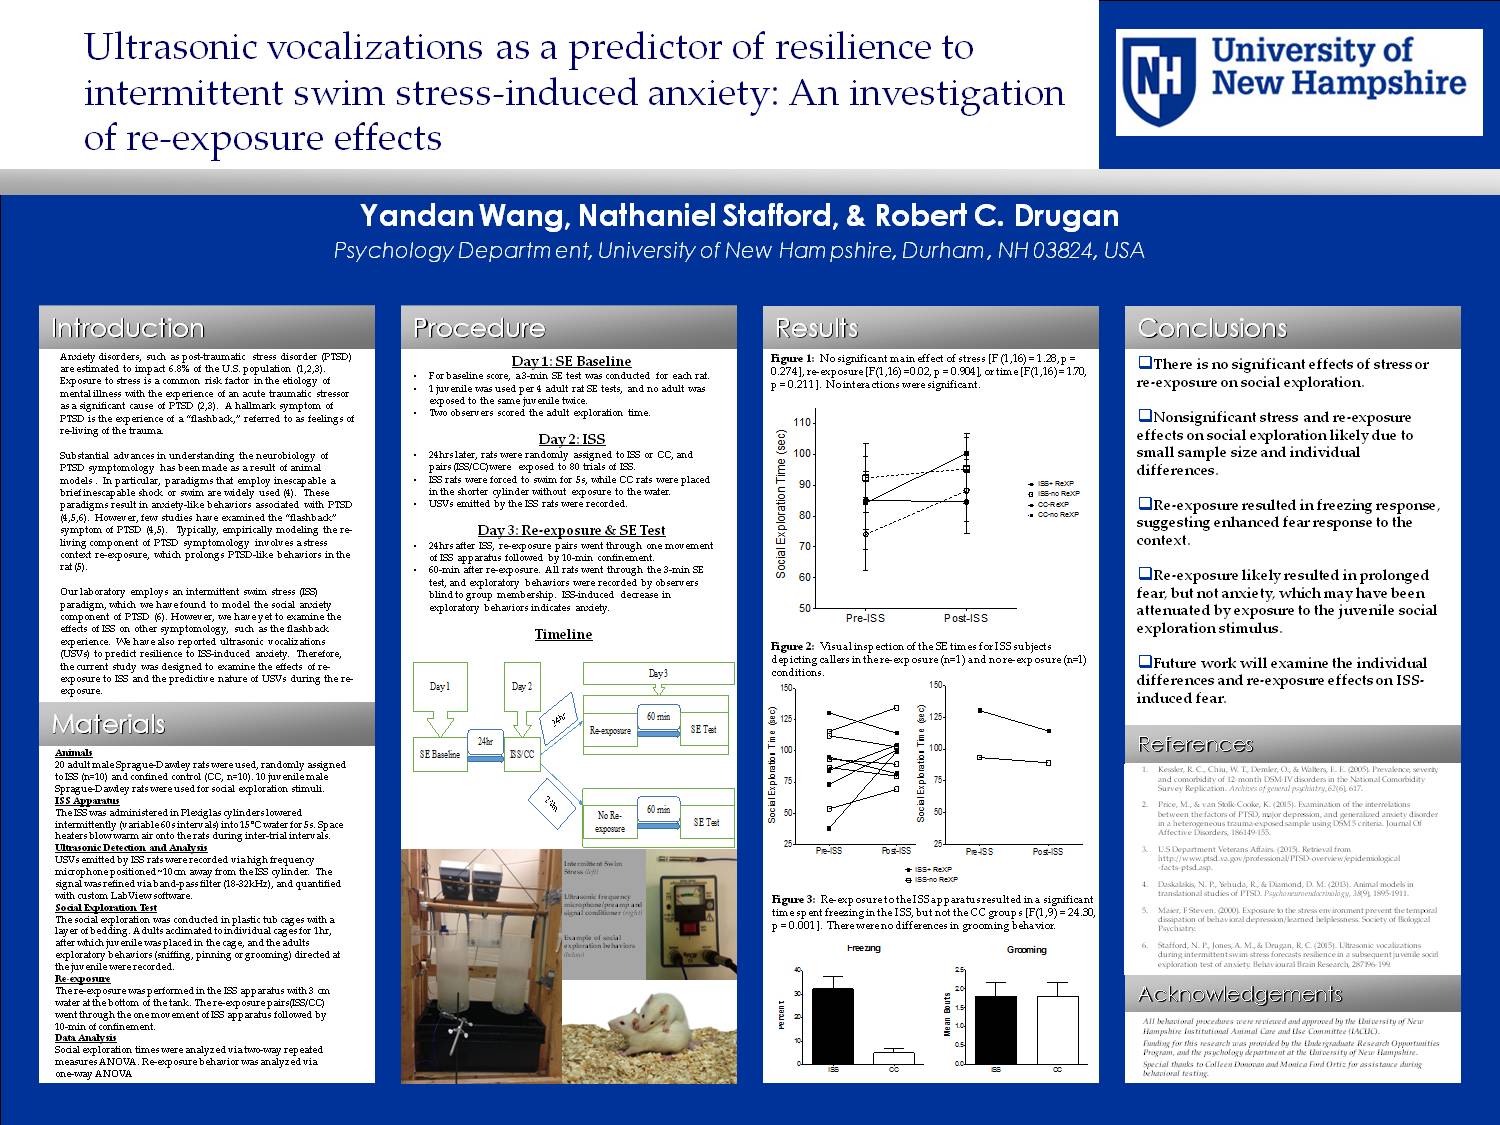 Ultrasonic Vocalizations As A Predictor Of Resilience To Intermittent Swim Stress-Induced Anxiety: An Investigation Of Re-Exposure Effects   by yzt2